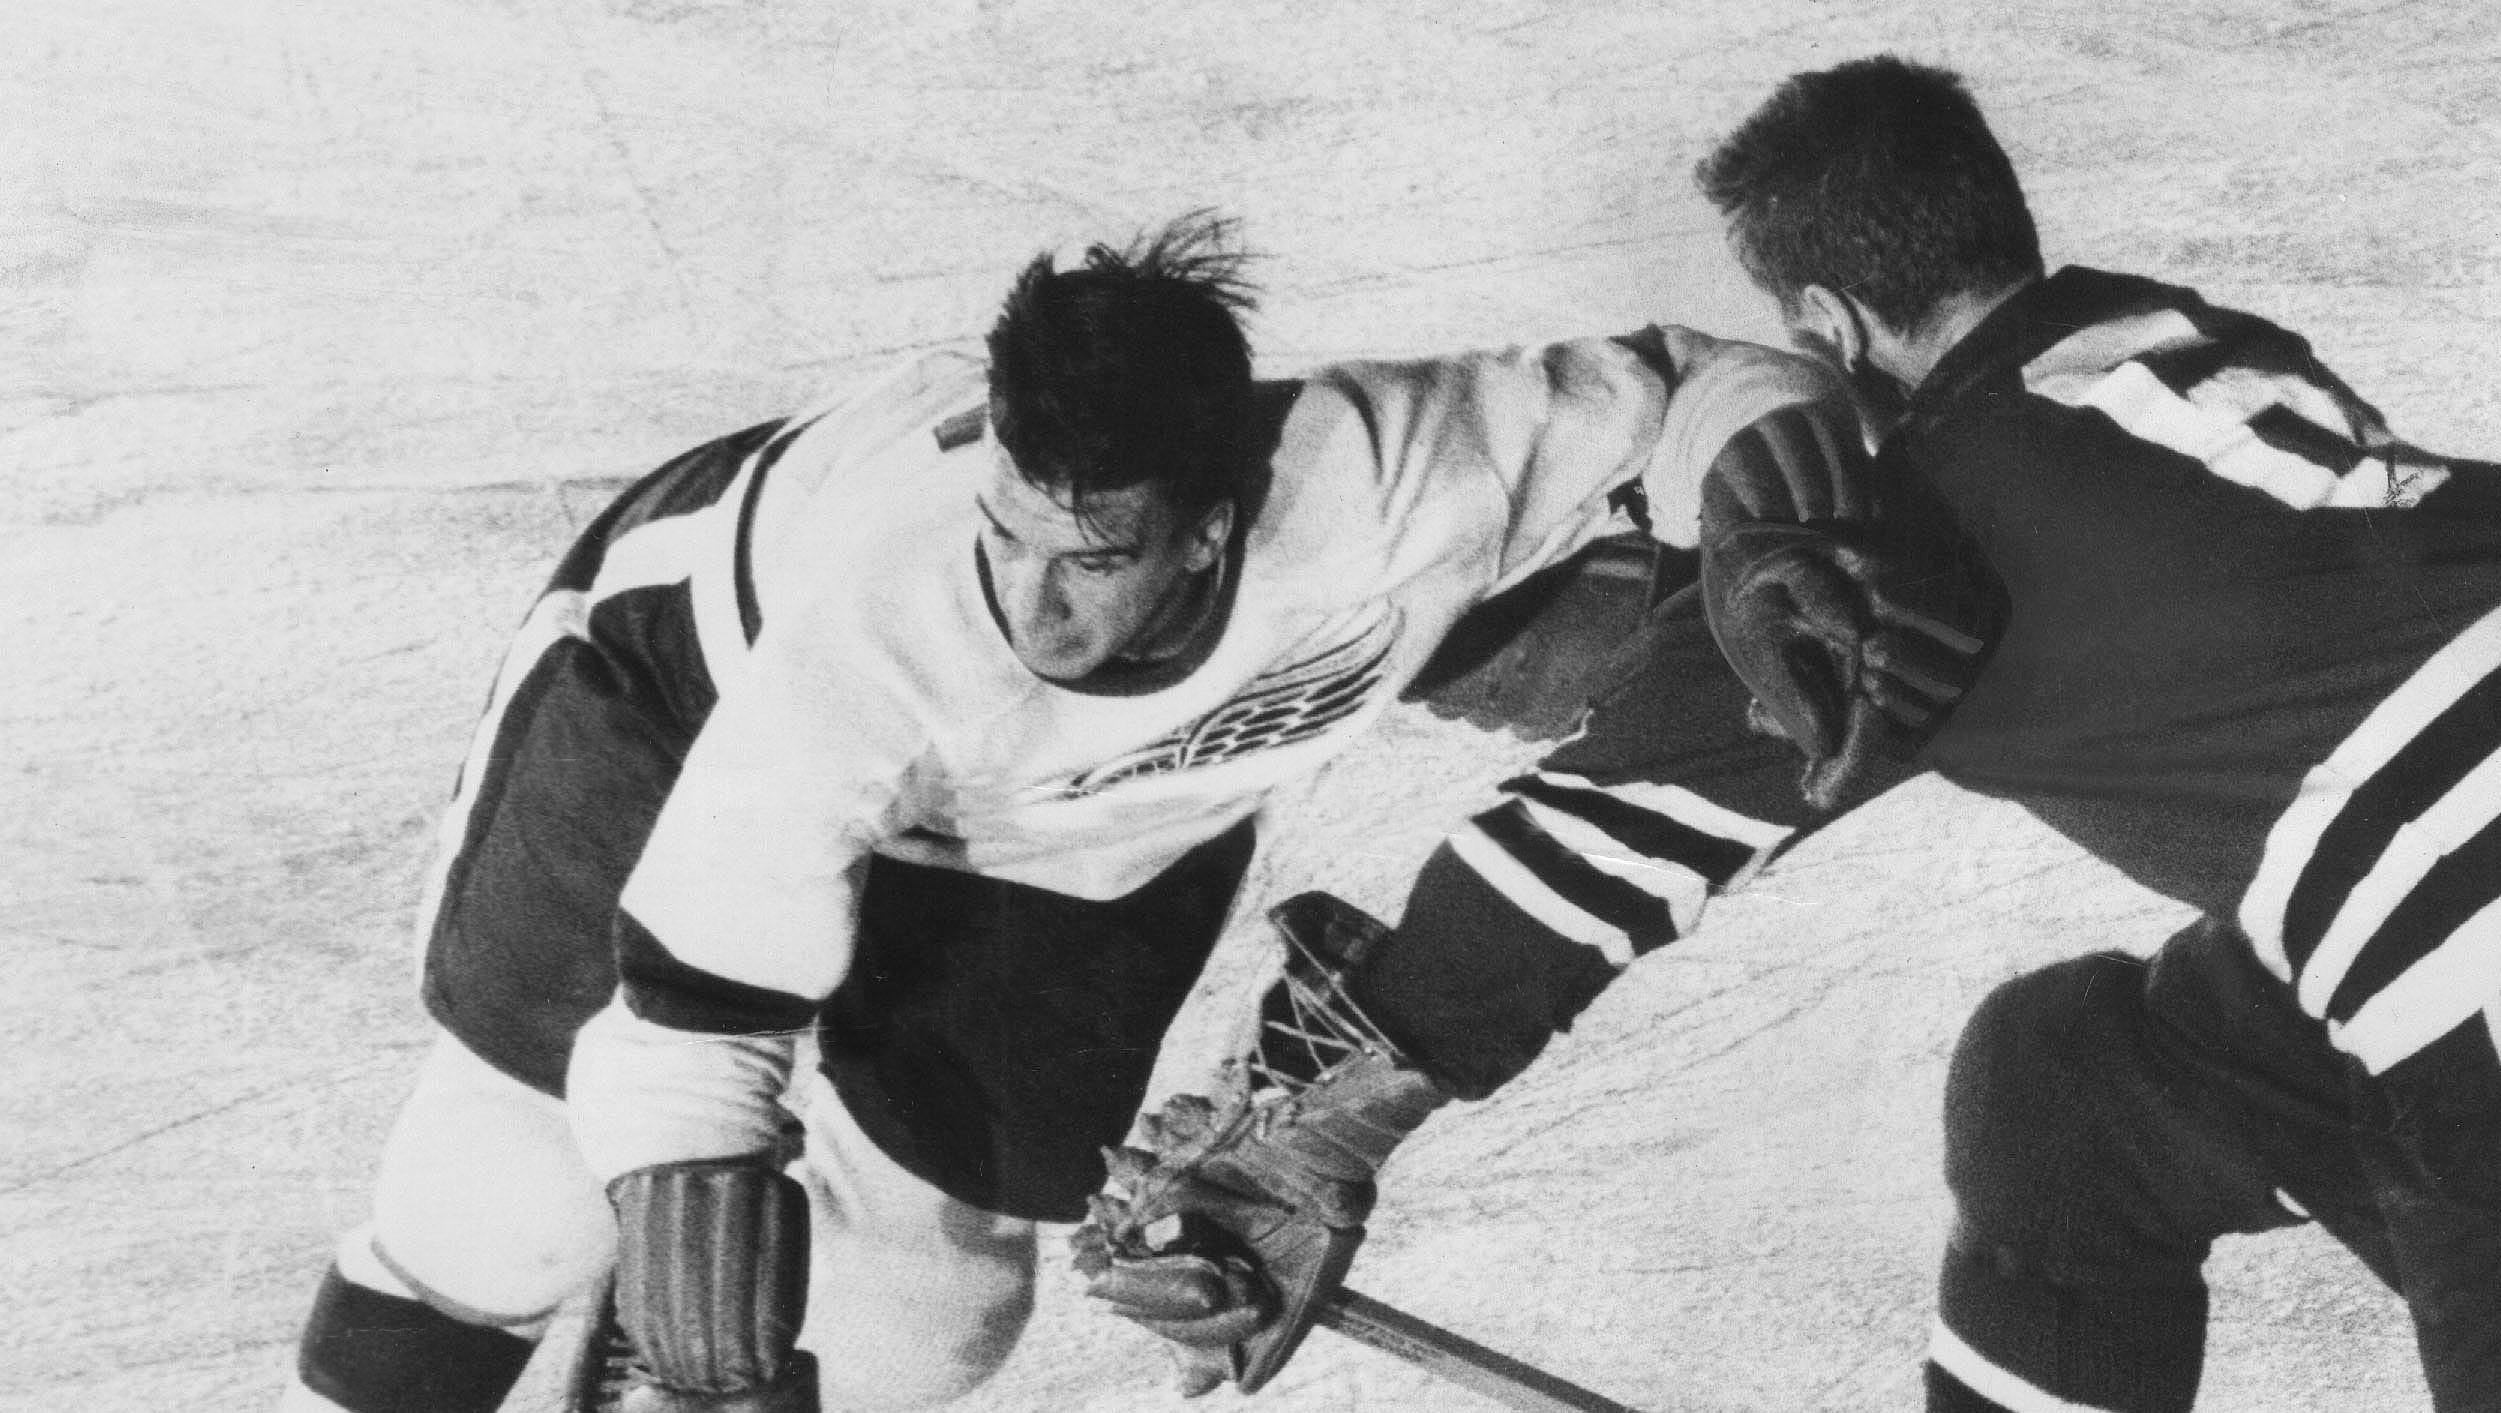 Ted Lindsay of the Detroit Red Wings  elbows his way past No. 6 Benny Woit of Chicago, October 20, 1955. While only 5 feet 8, Lindsay was a tough forward, often referred to as "Terrible Ted."